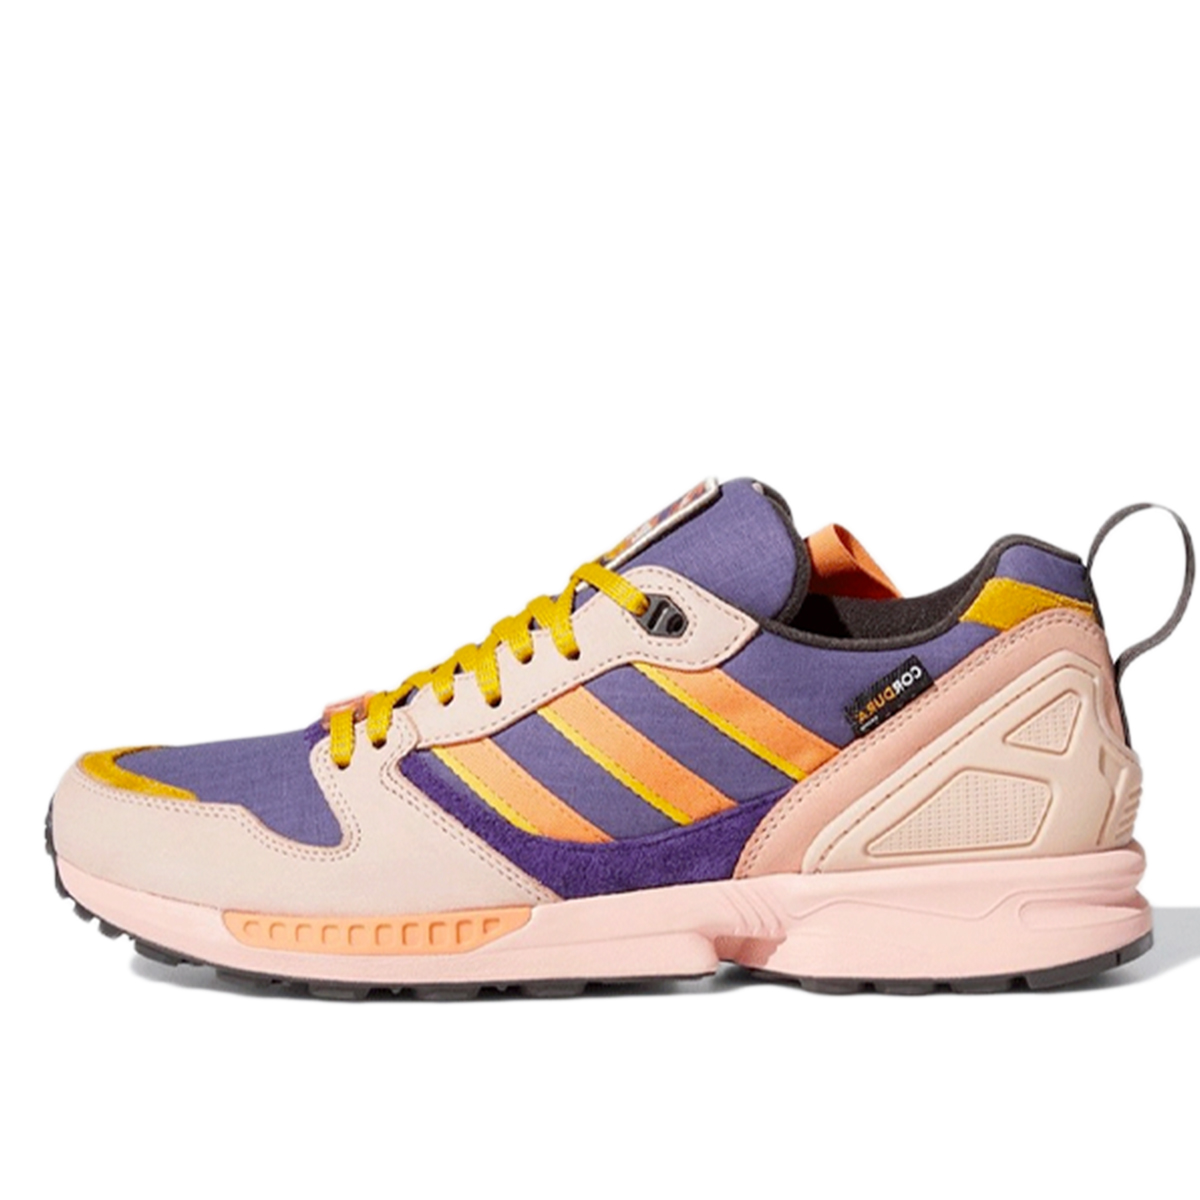 Qoo10 - ?Free Shipping??100% Authentic?ADIDAS ZX 5000 RSPN M19352 / D men s  ru : Bag & Wallet